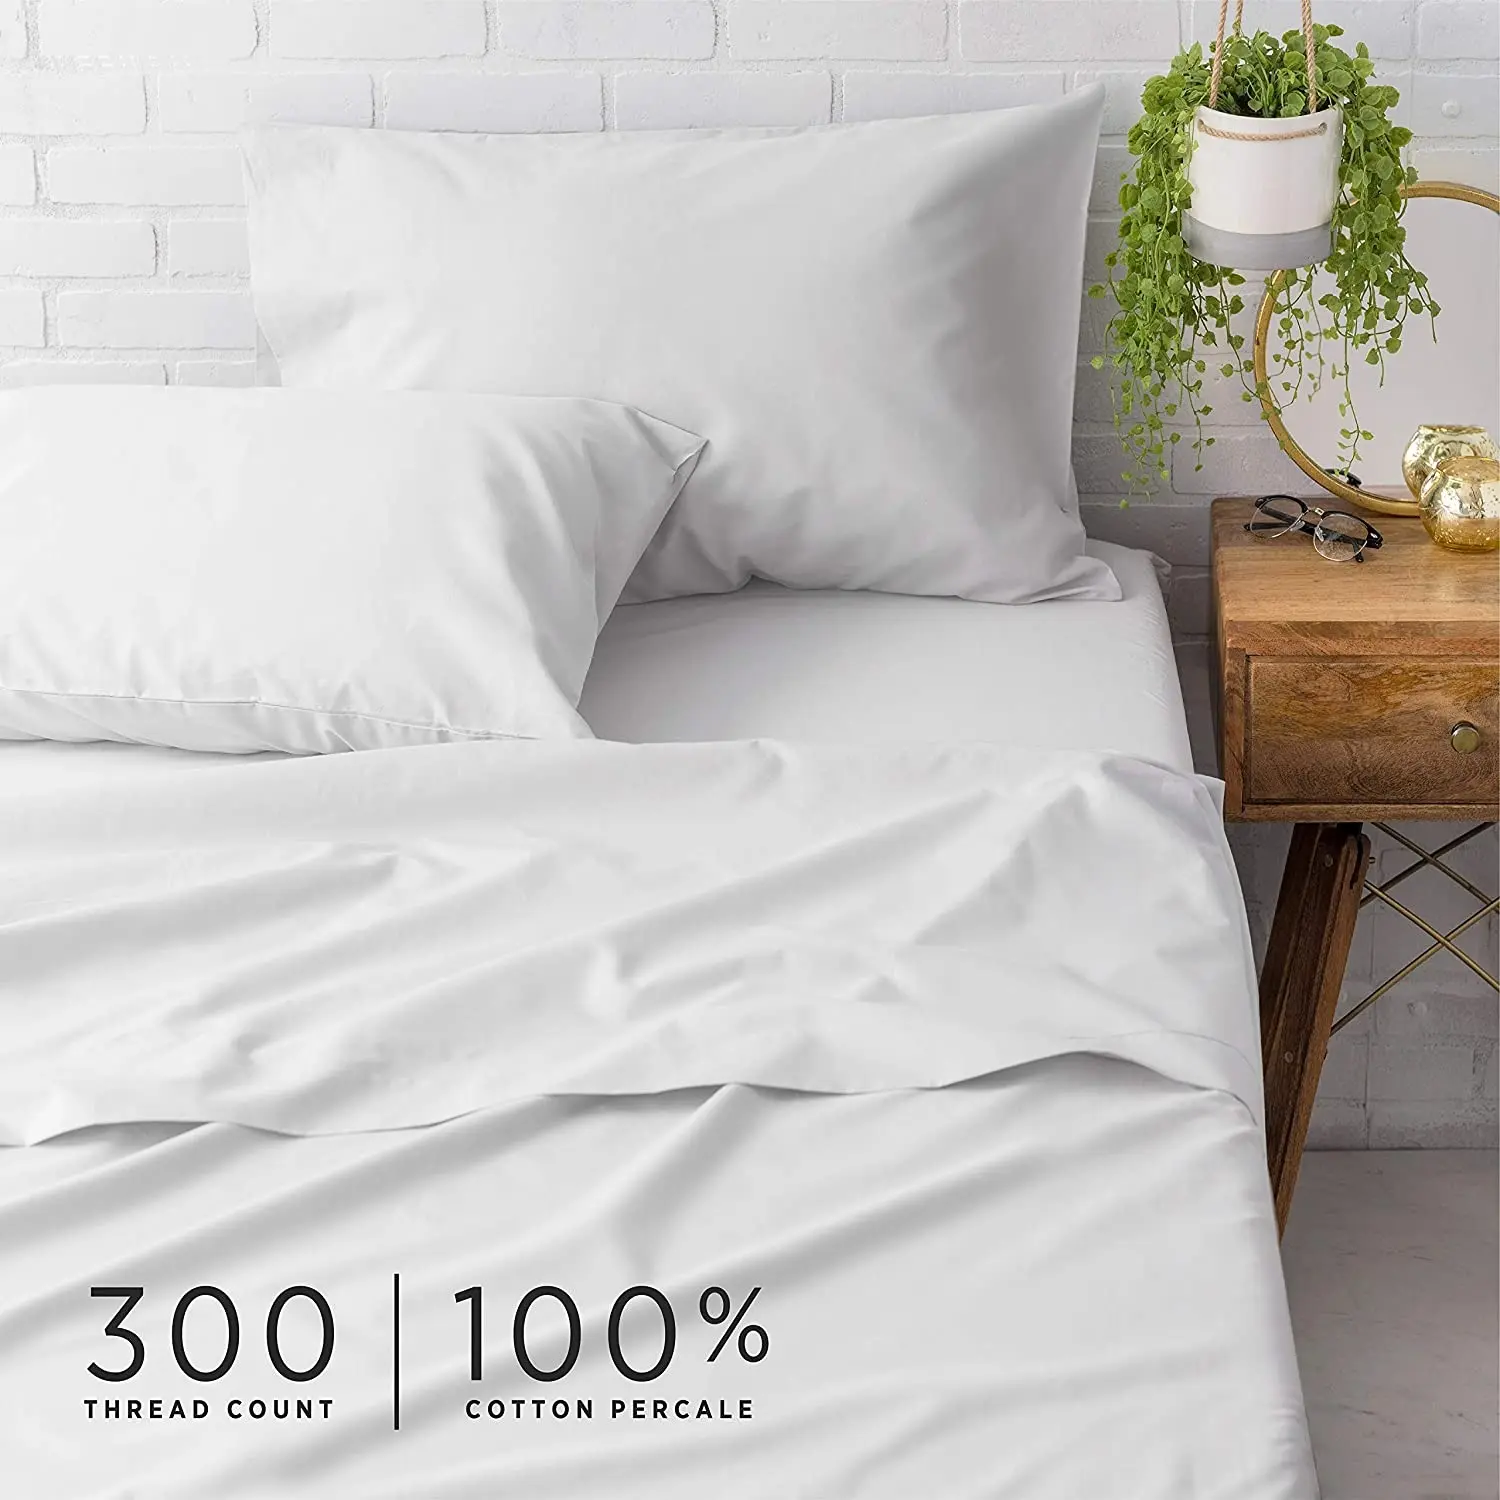 100% Egyptian Cotton 5 Star hotel 300 Thread Count Organic Cotton Bed Sheets Set Hotel Textile